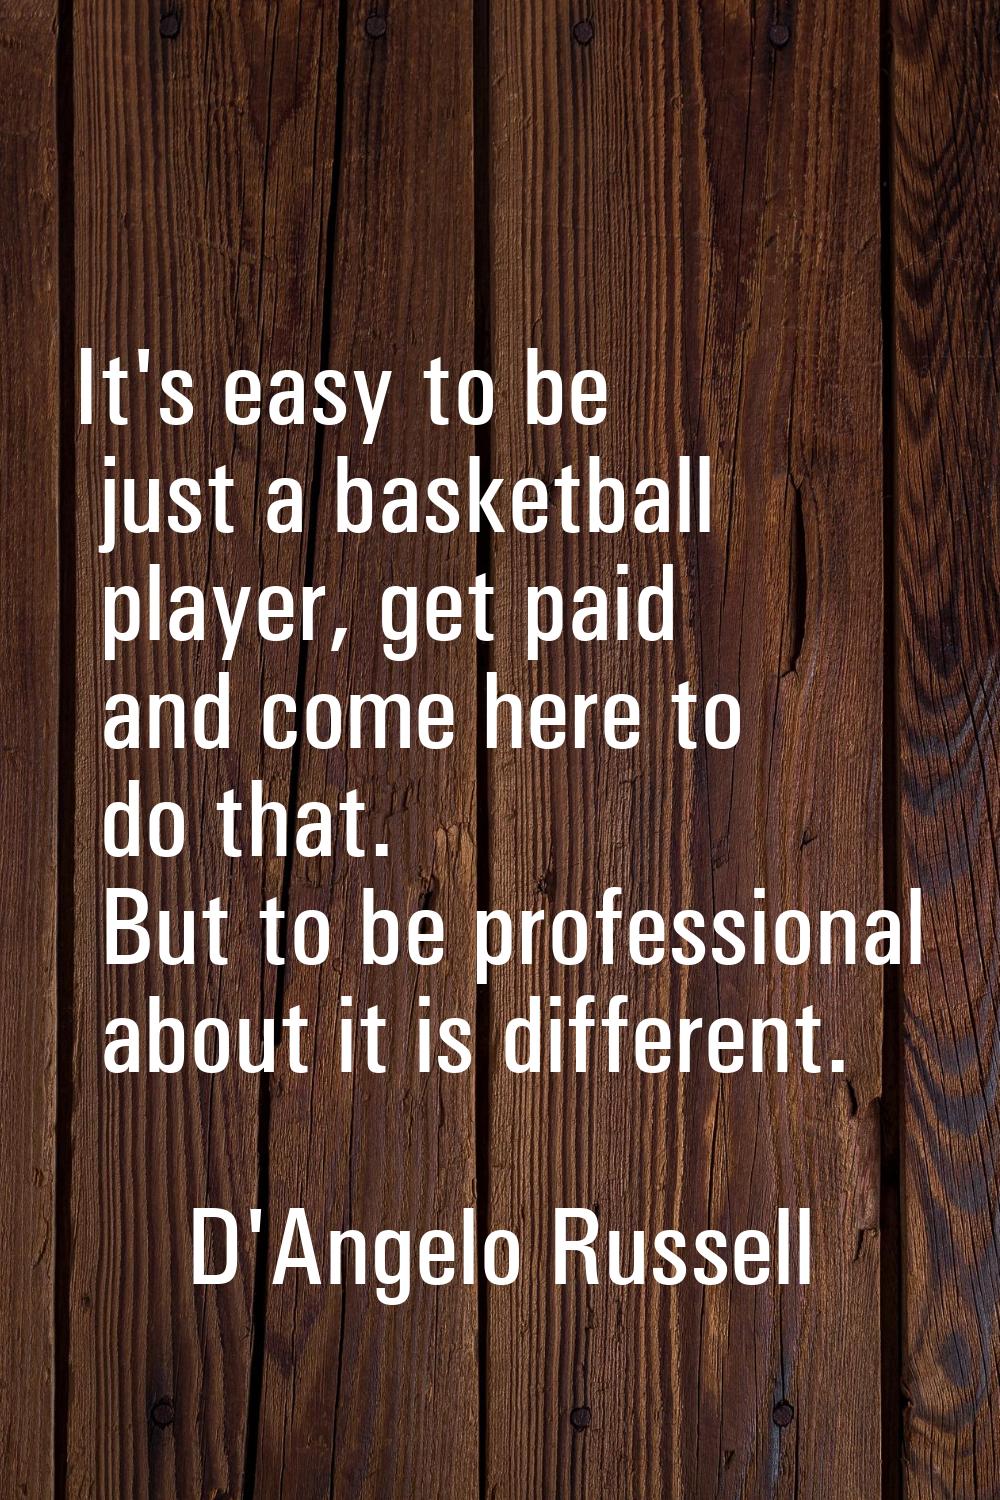 It's easy to be just a basketball player, get paid and come here to do that. But to be professional